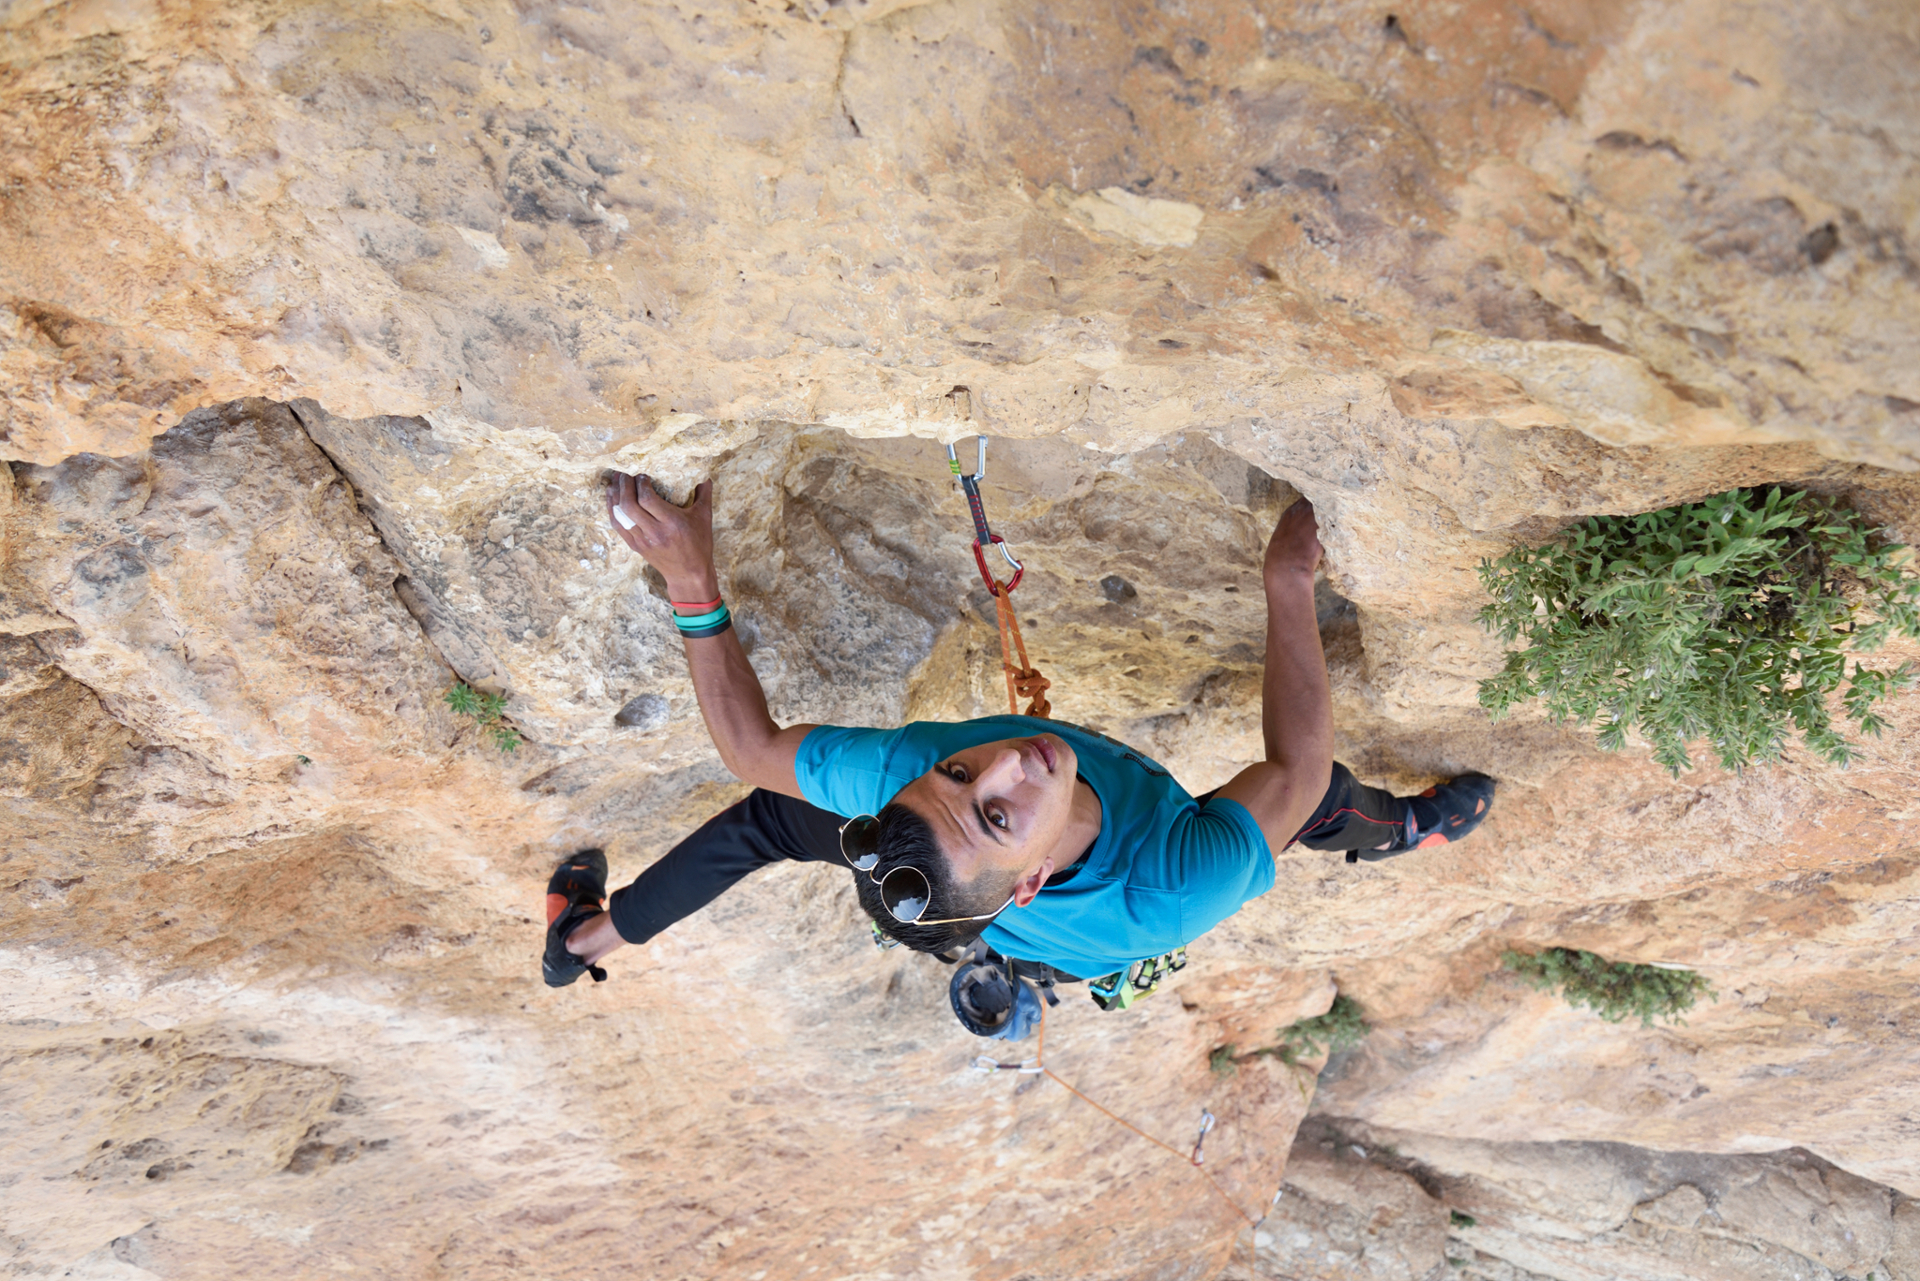 Urwah Askar on a route called “Yom Asel / Day of Honey," the first route bolted by Bruns and Harris in Palestine. (Photo by Ray Wood) 